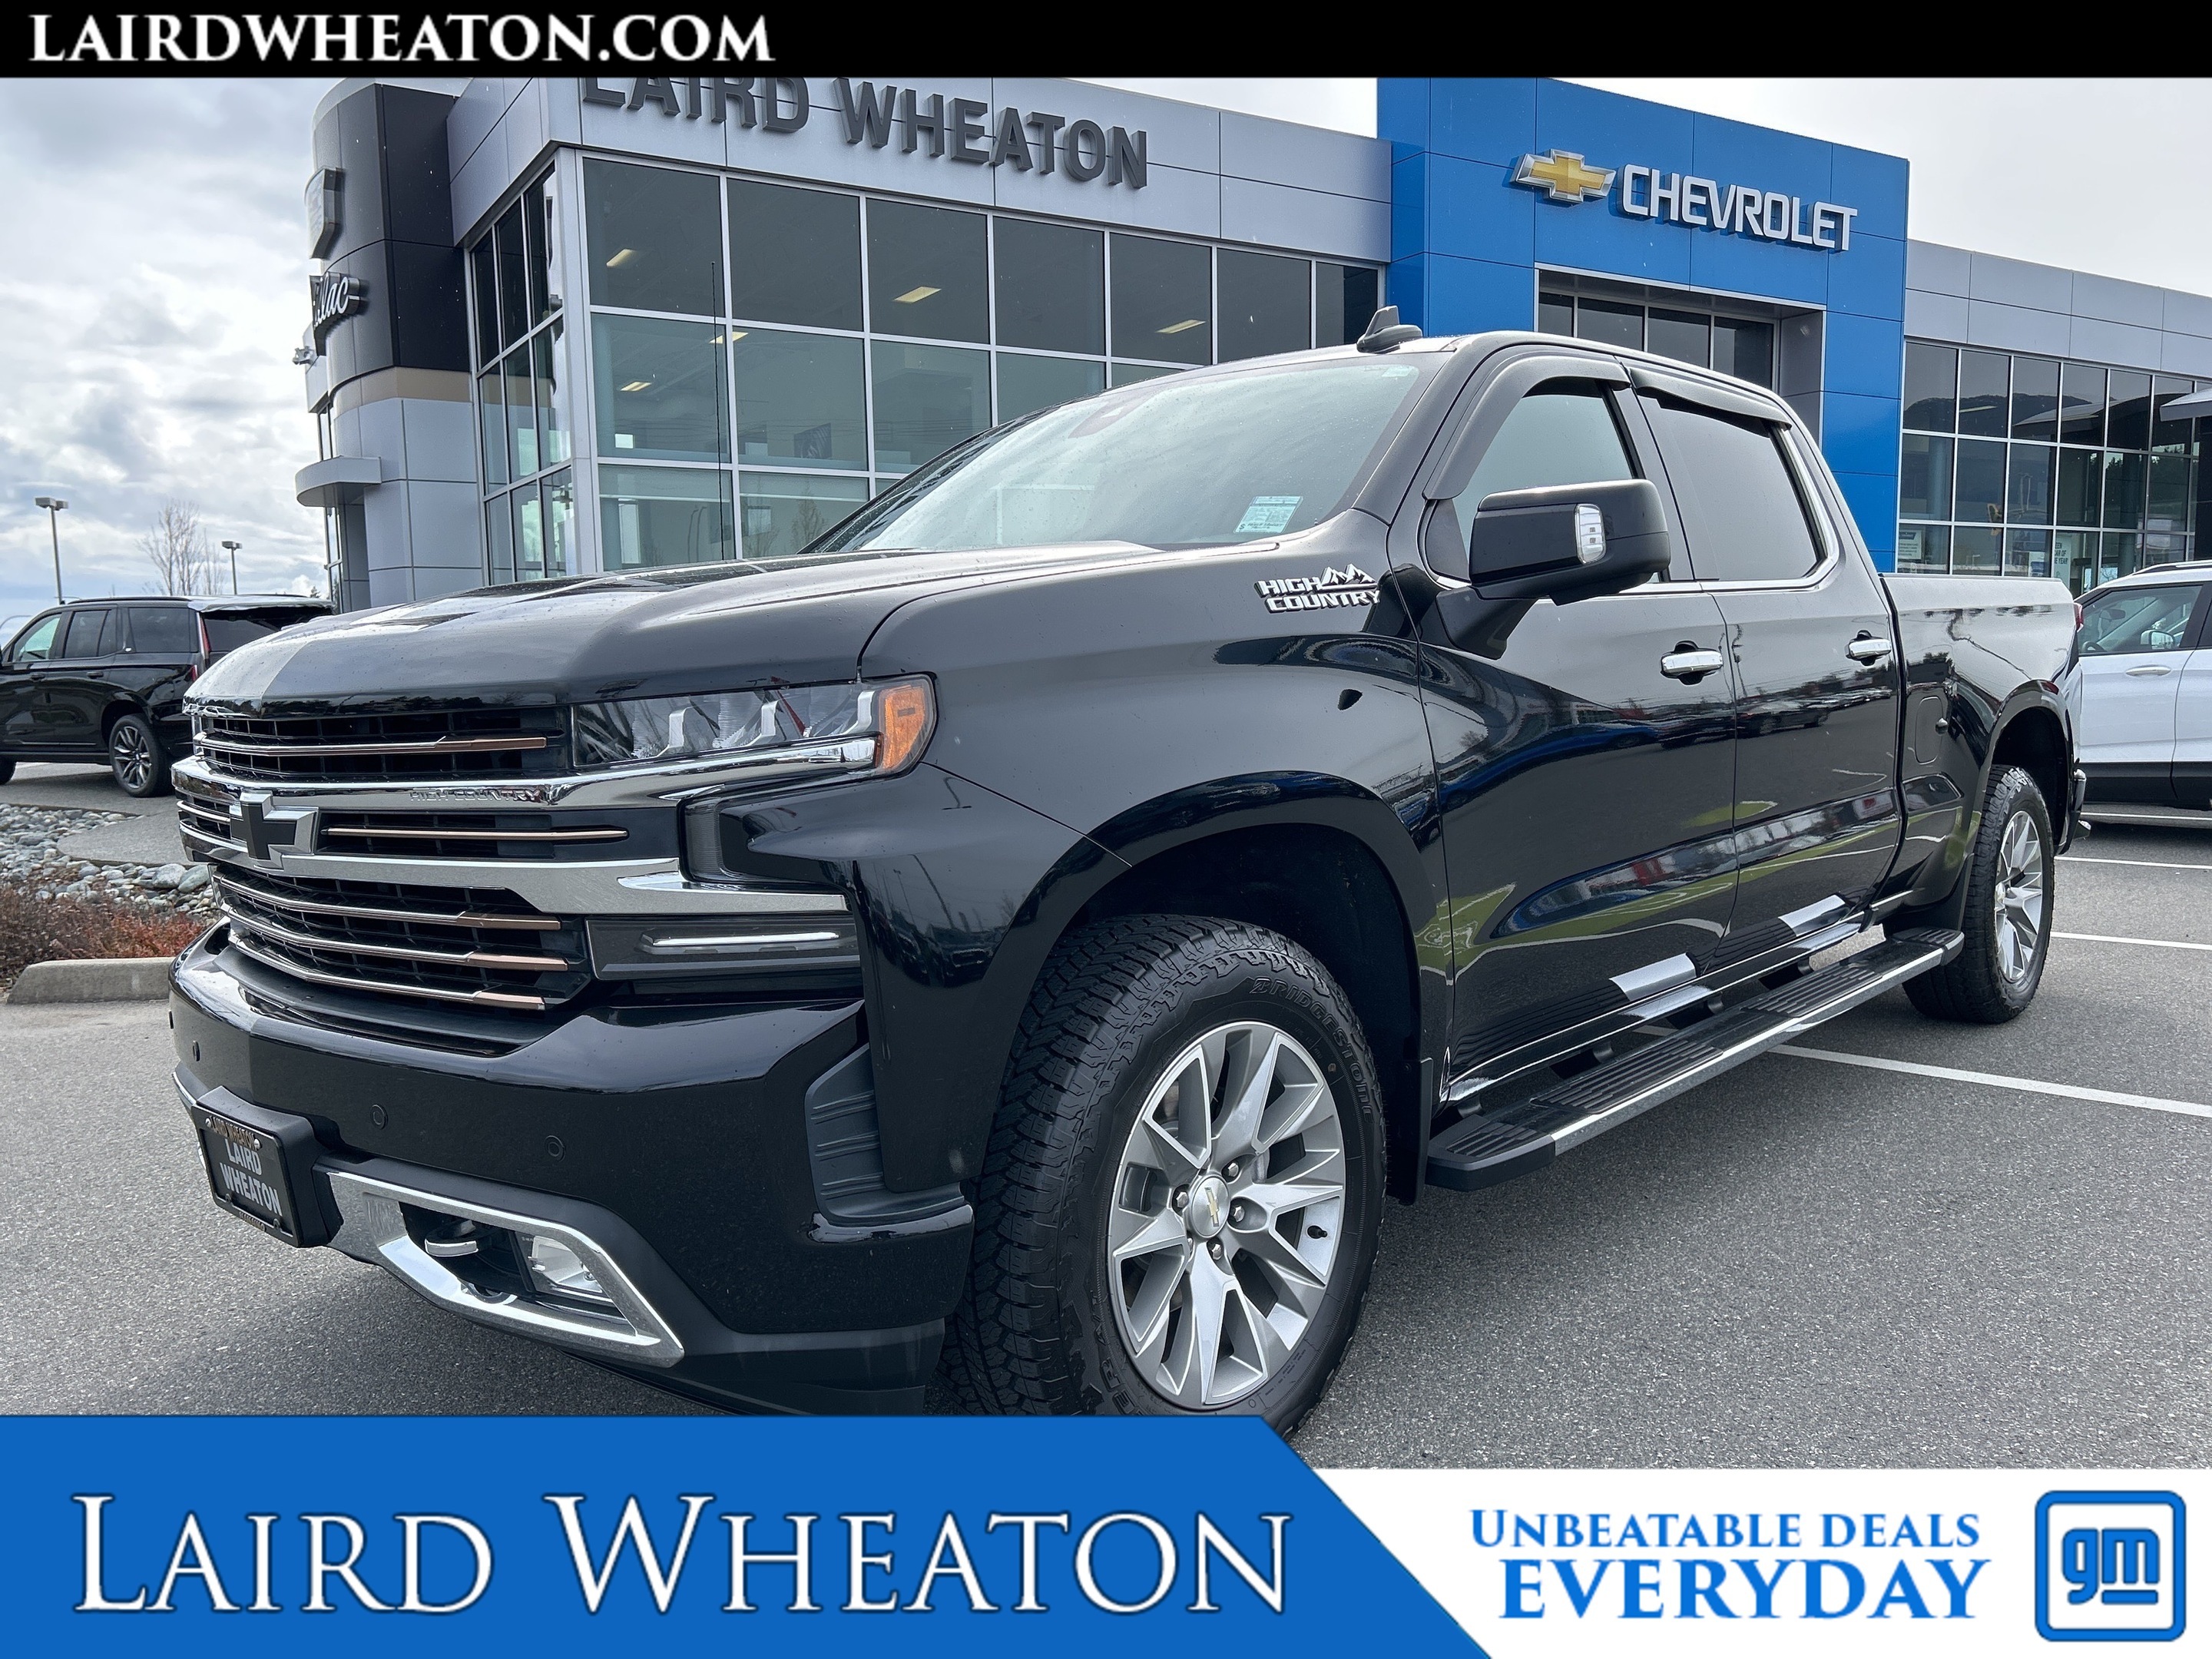 2019 Chevrolet Silverado 1500 High Country 4X4, Leather, Power Group, One Owner